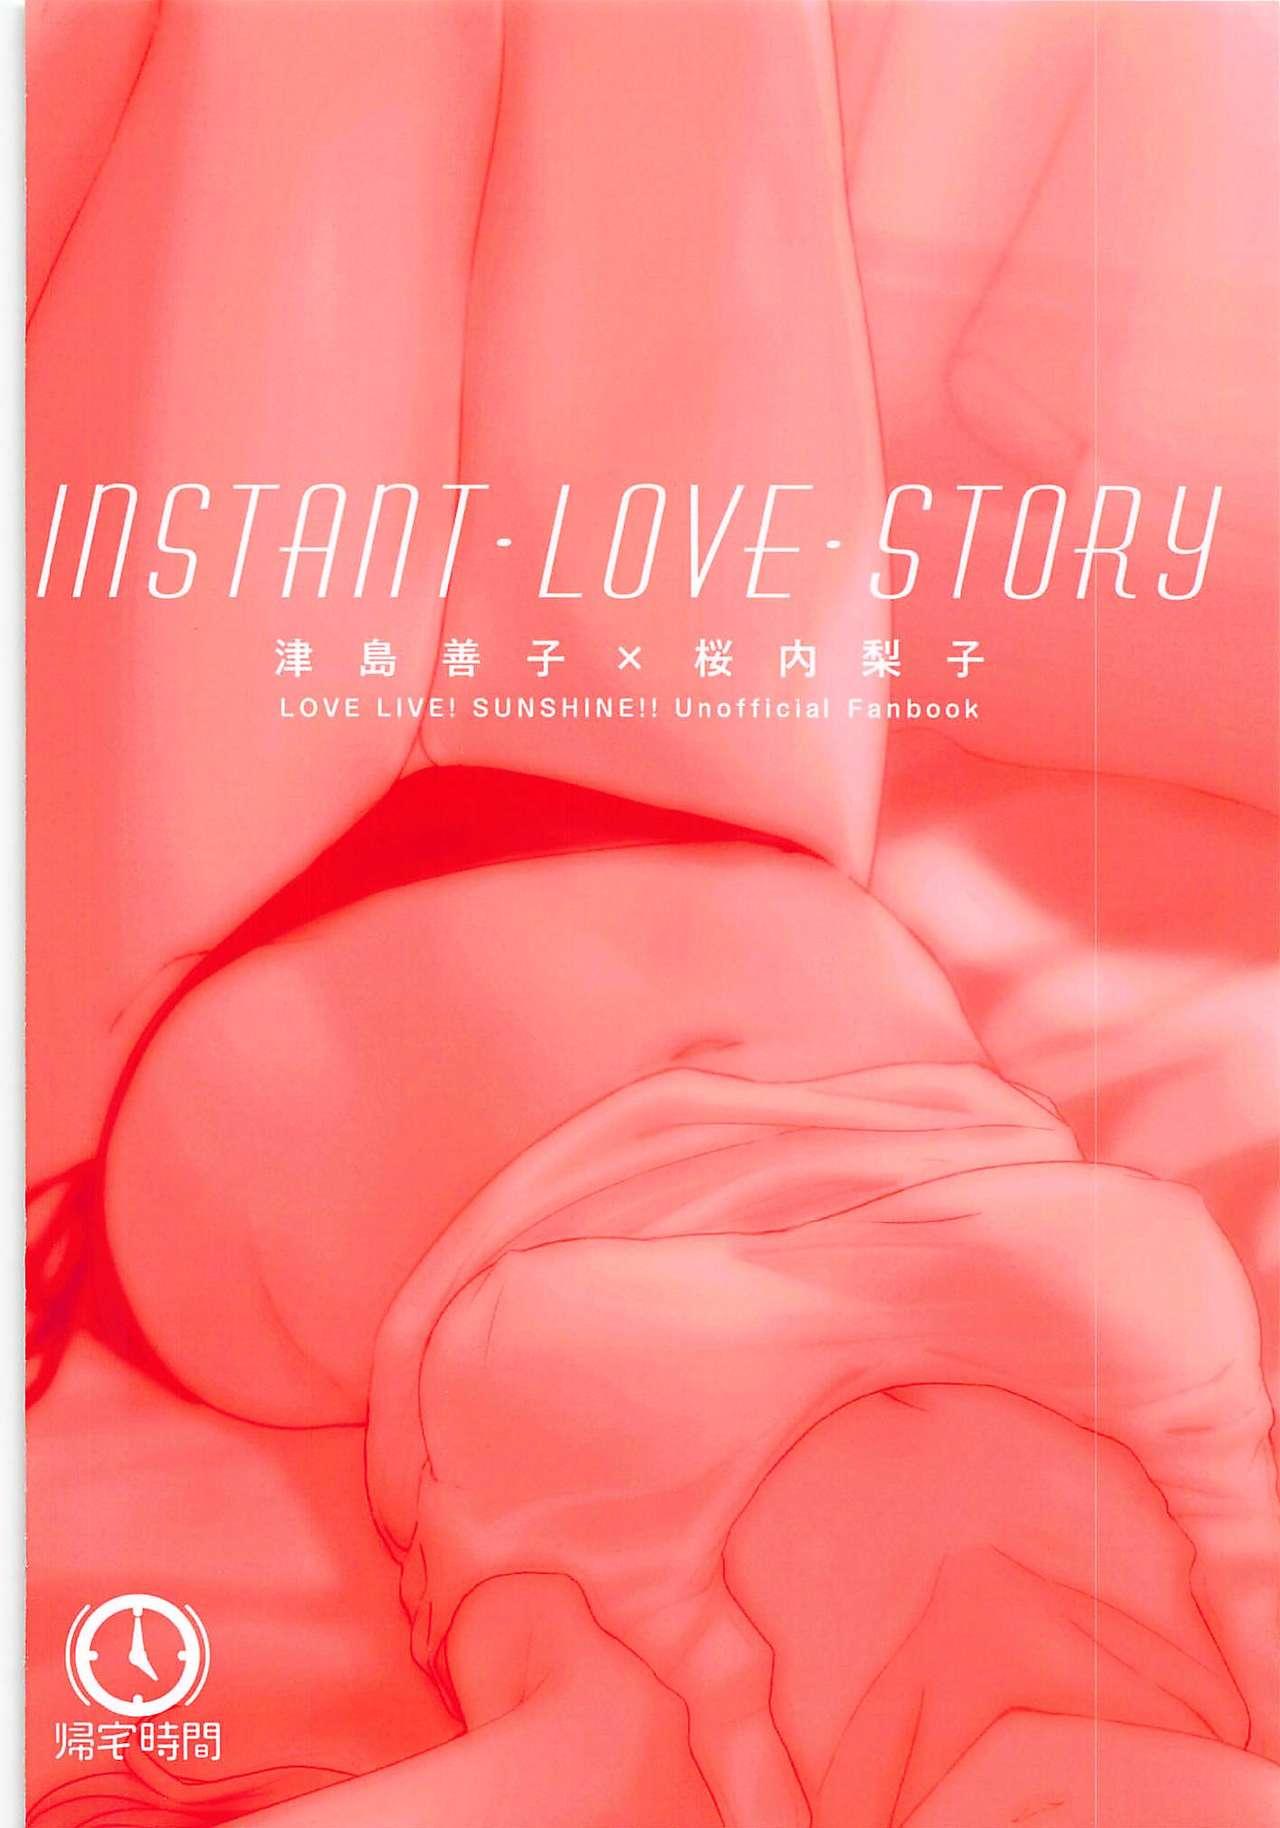 Oral Sex INSTANT LOVE STORY - Love live sunshine Women Sucking - Page 26